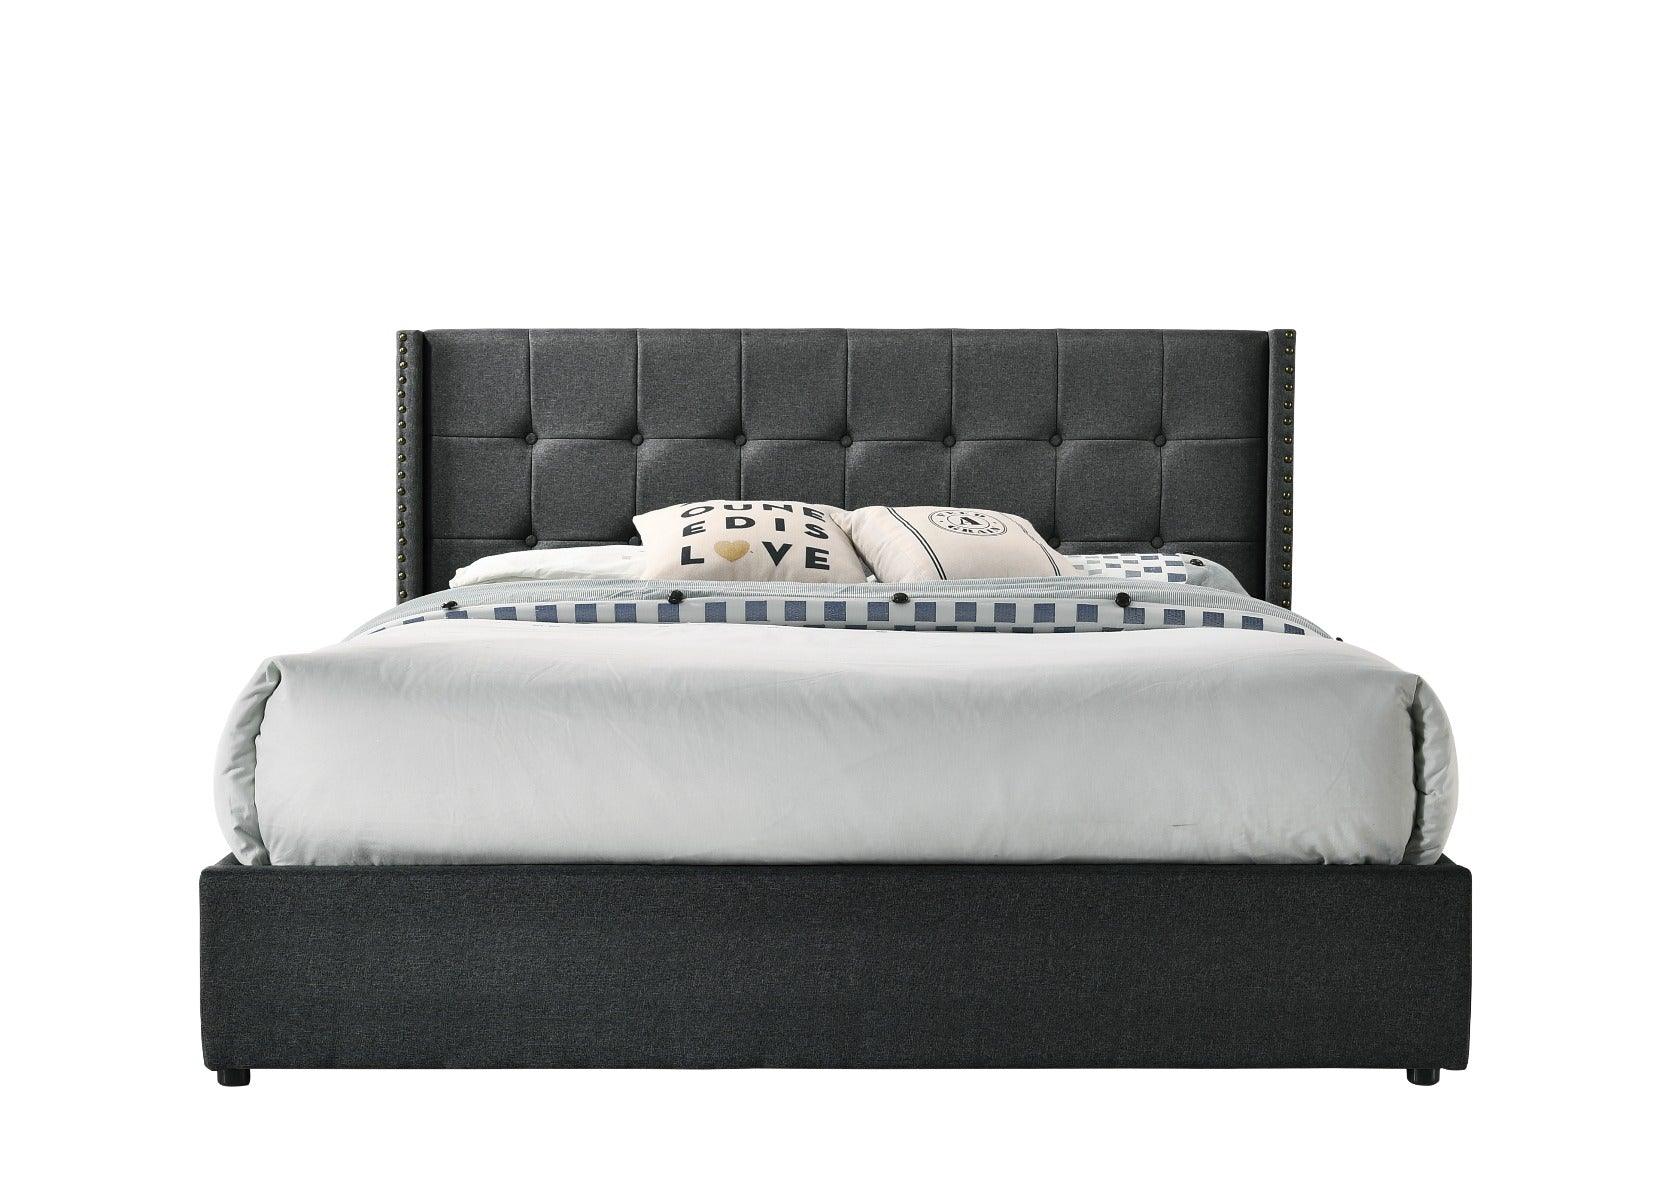 King Sized Winged Fabric Bed Frame with Gas Lift Storage in Charcoal